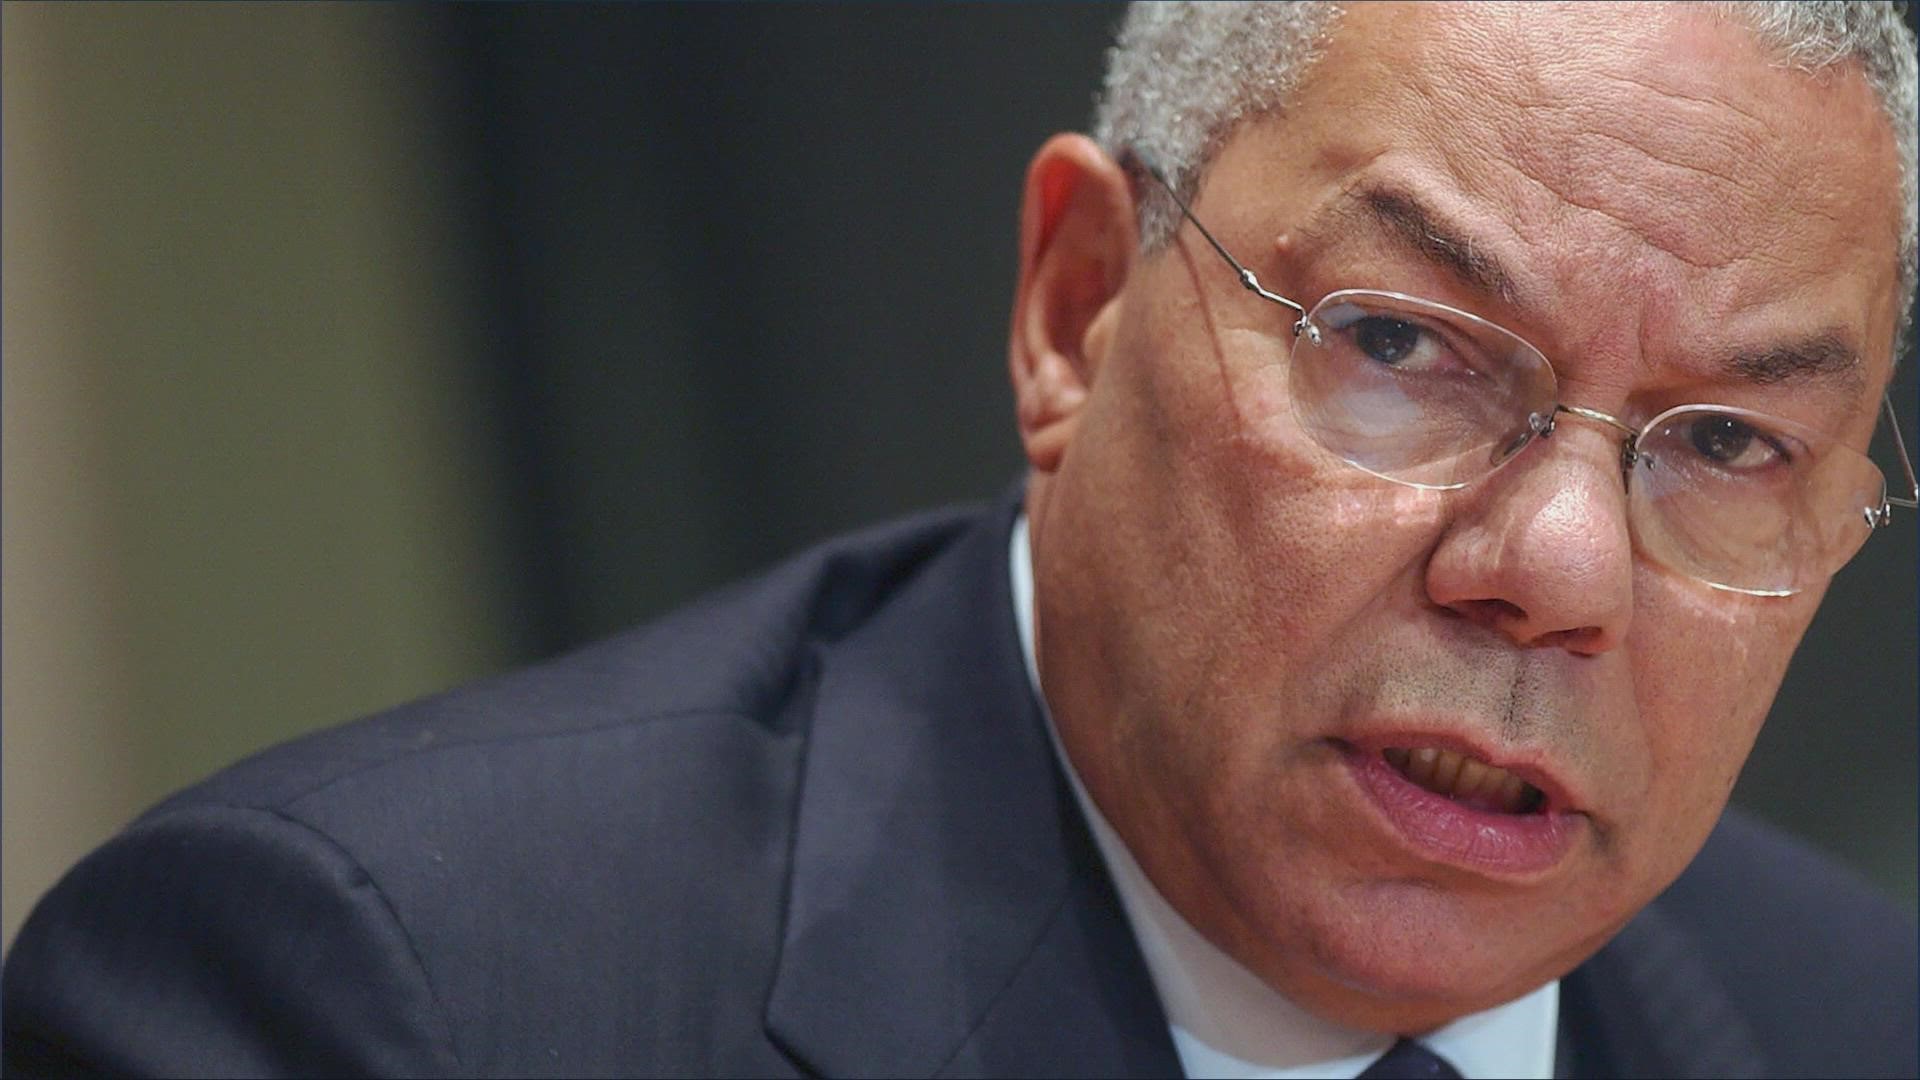 Colin Powell, the former Joint Chiefs chairman and secretary of state, is being remembered by several public figures in Texas as a "great public servant."